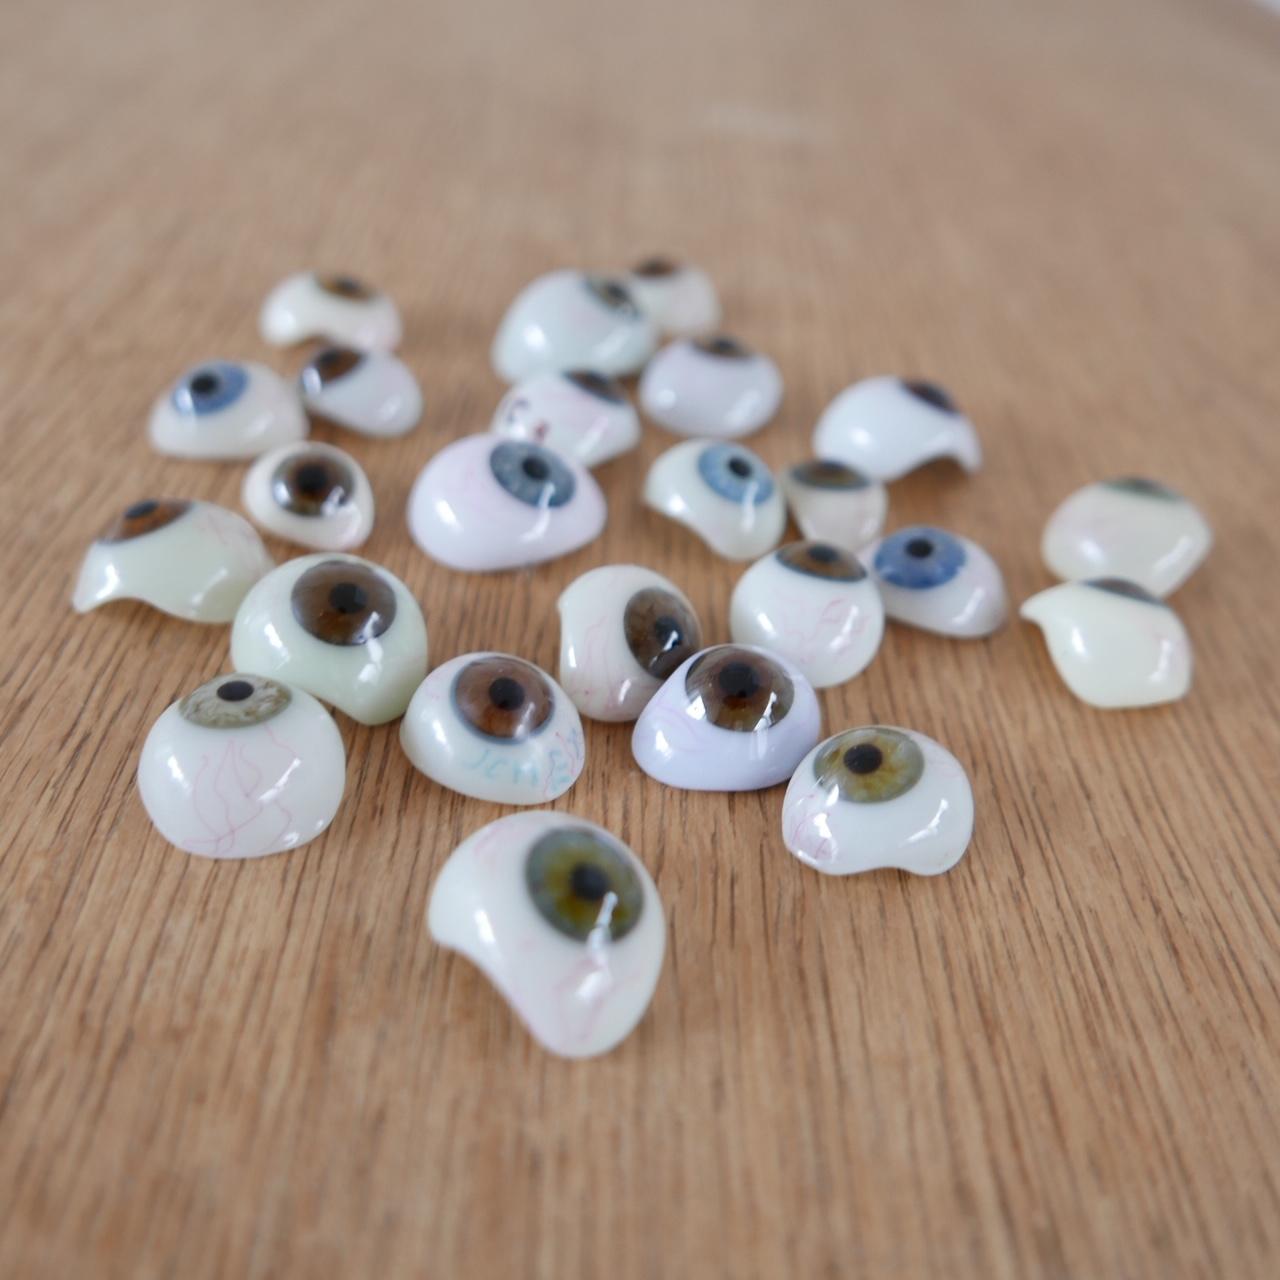 A rare set of 24 glass eyes,

early 20th century.

Glass and porcelain.

Different sizes, colors and shapes.

Highly collectable and a great talking curio.

Dimensions: The largest is approximate: 2.5 W x 2 D x 1.5 H in cm.



   